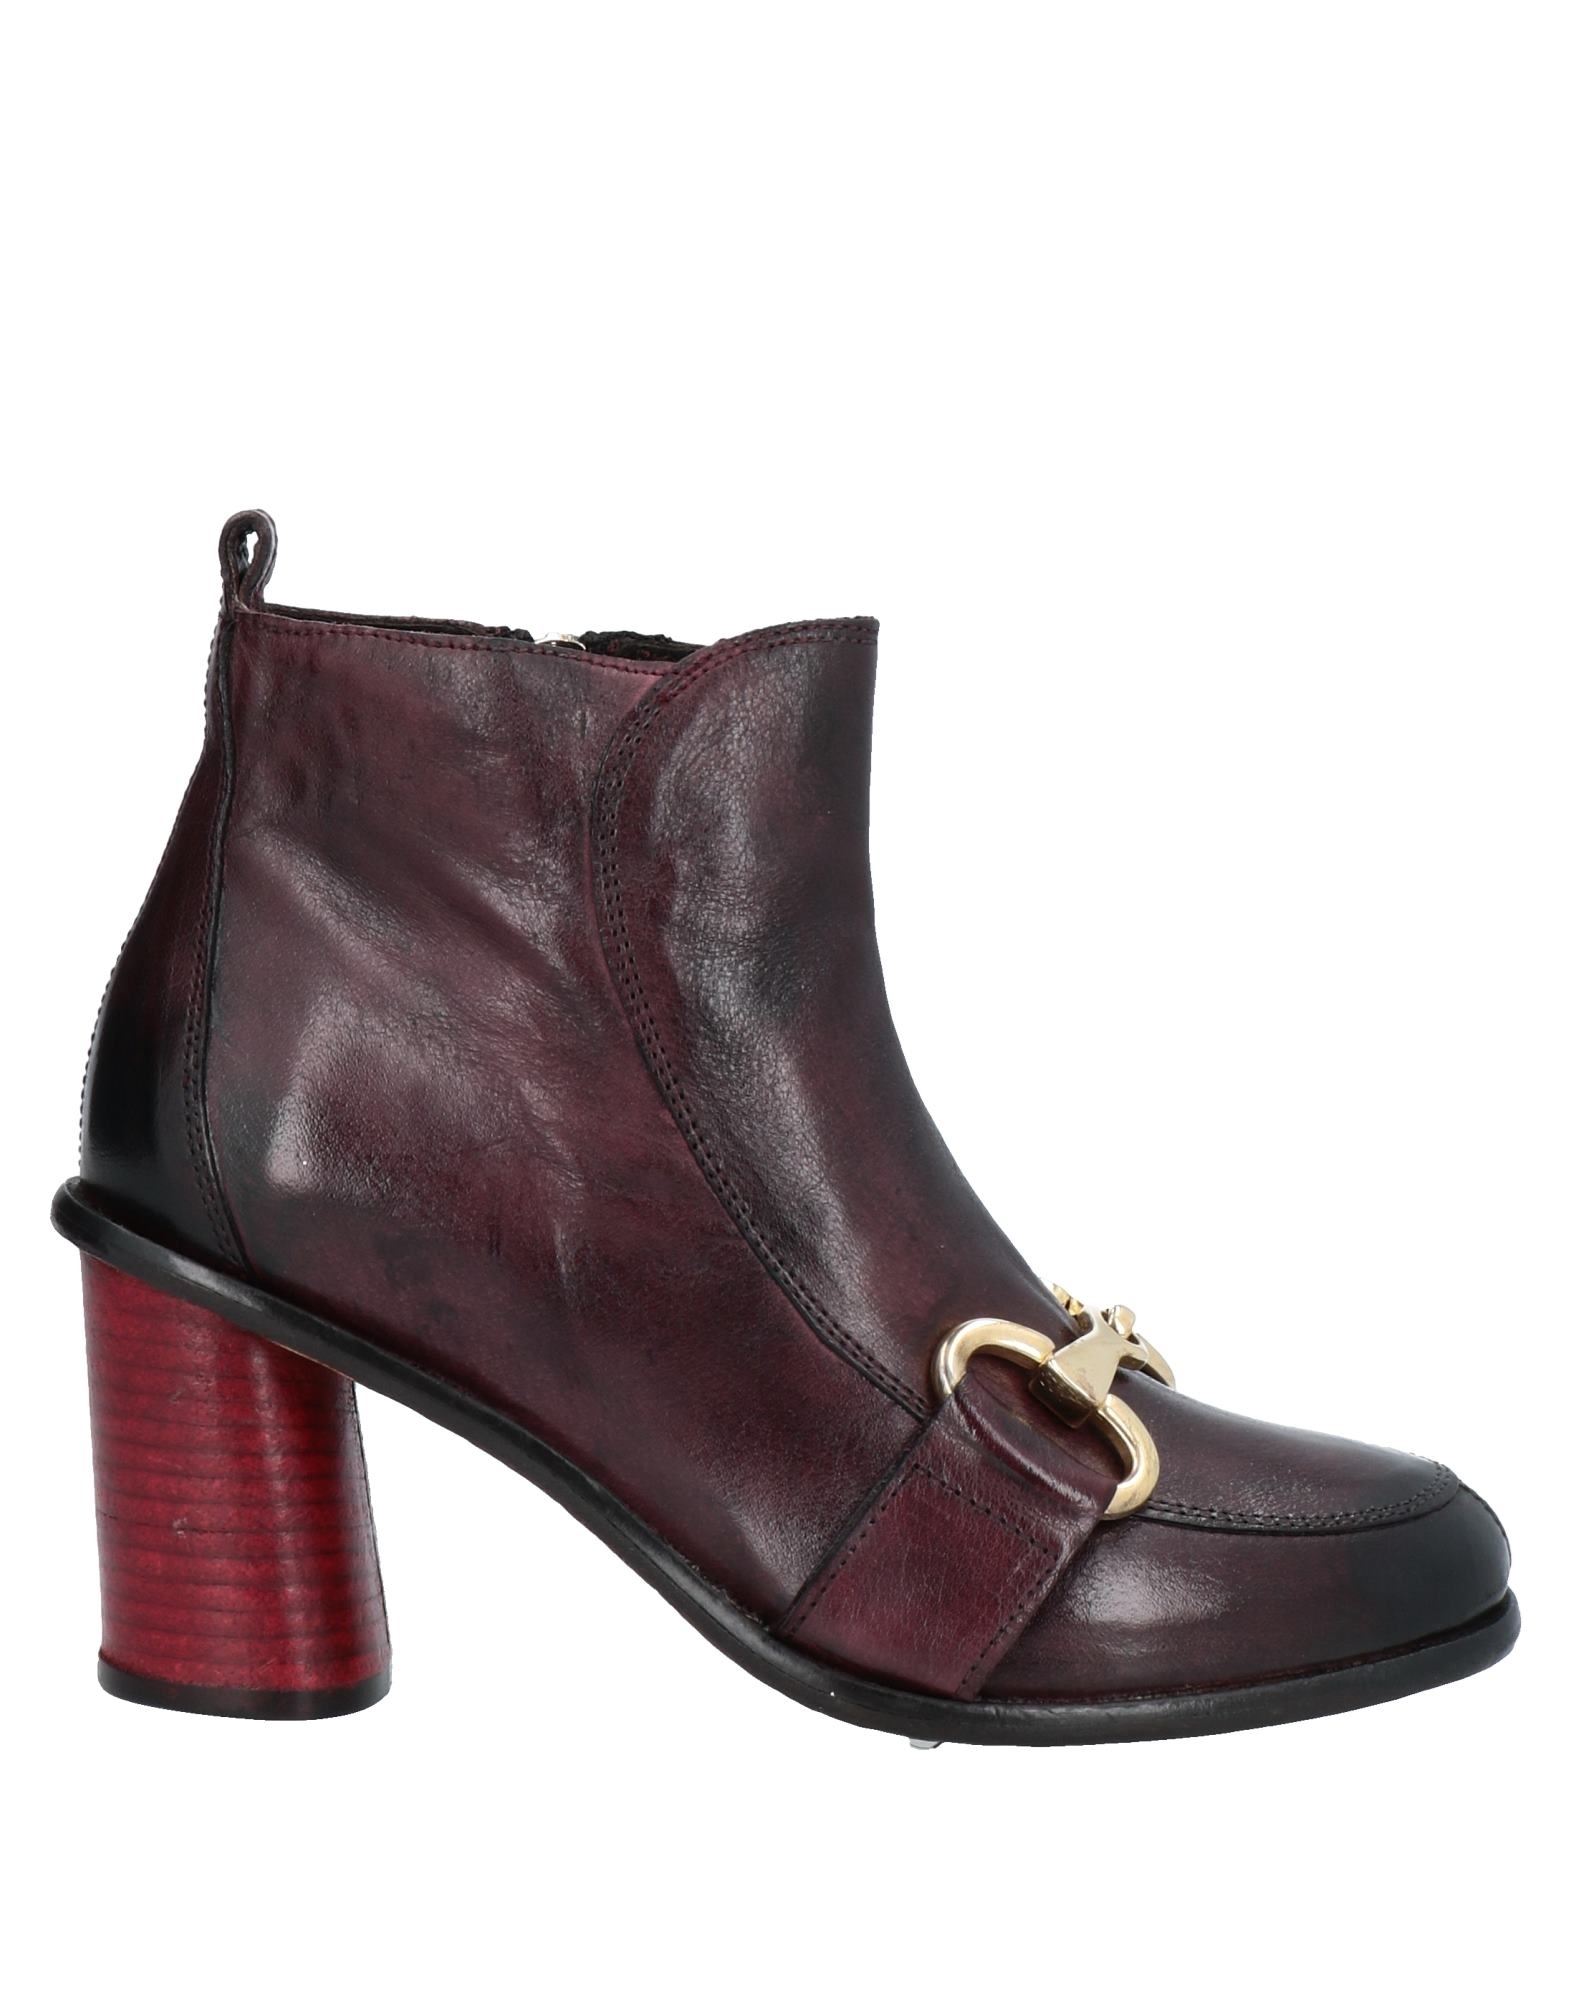 Jp/david Ankle Boots In Maroon